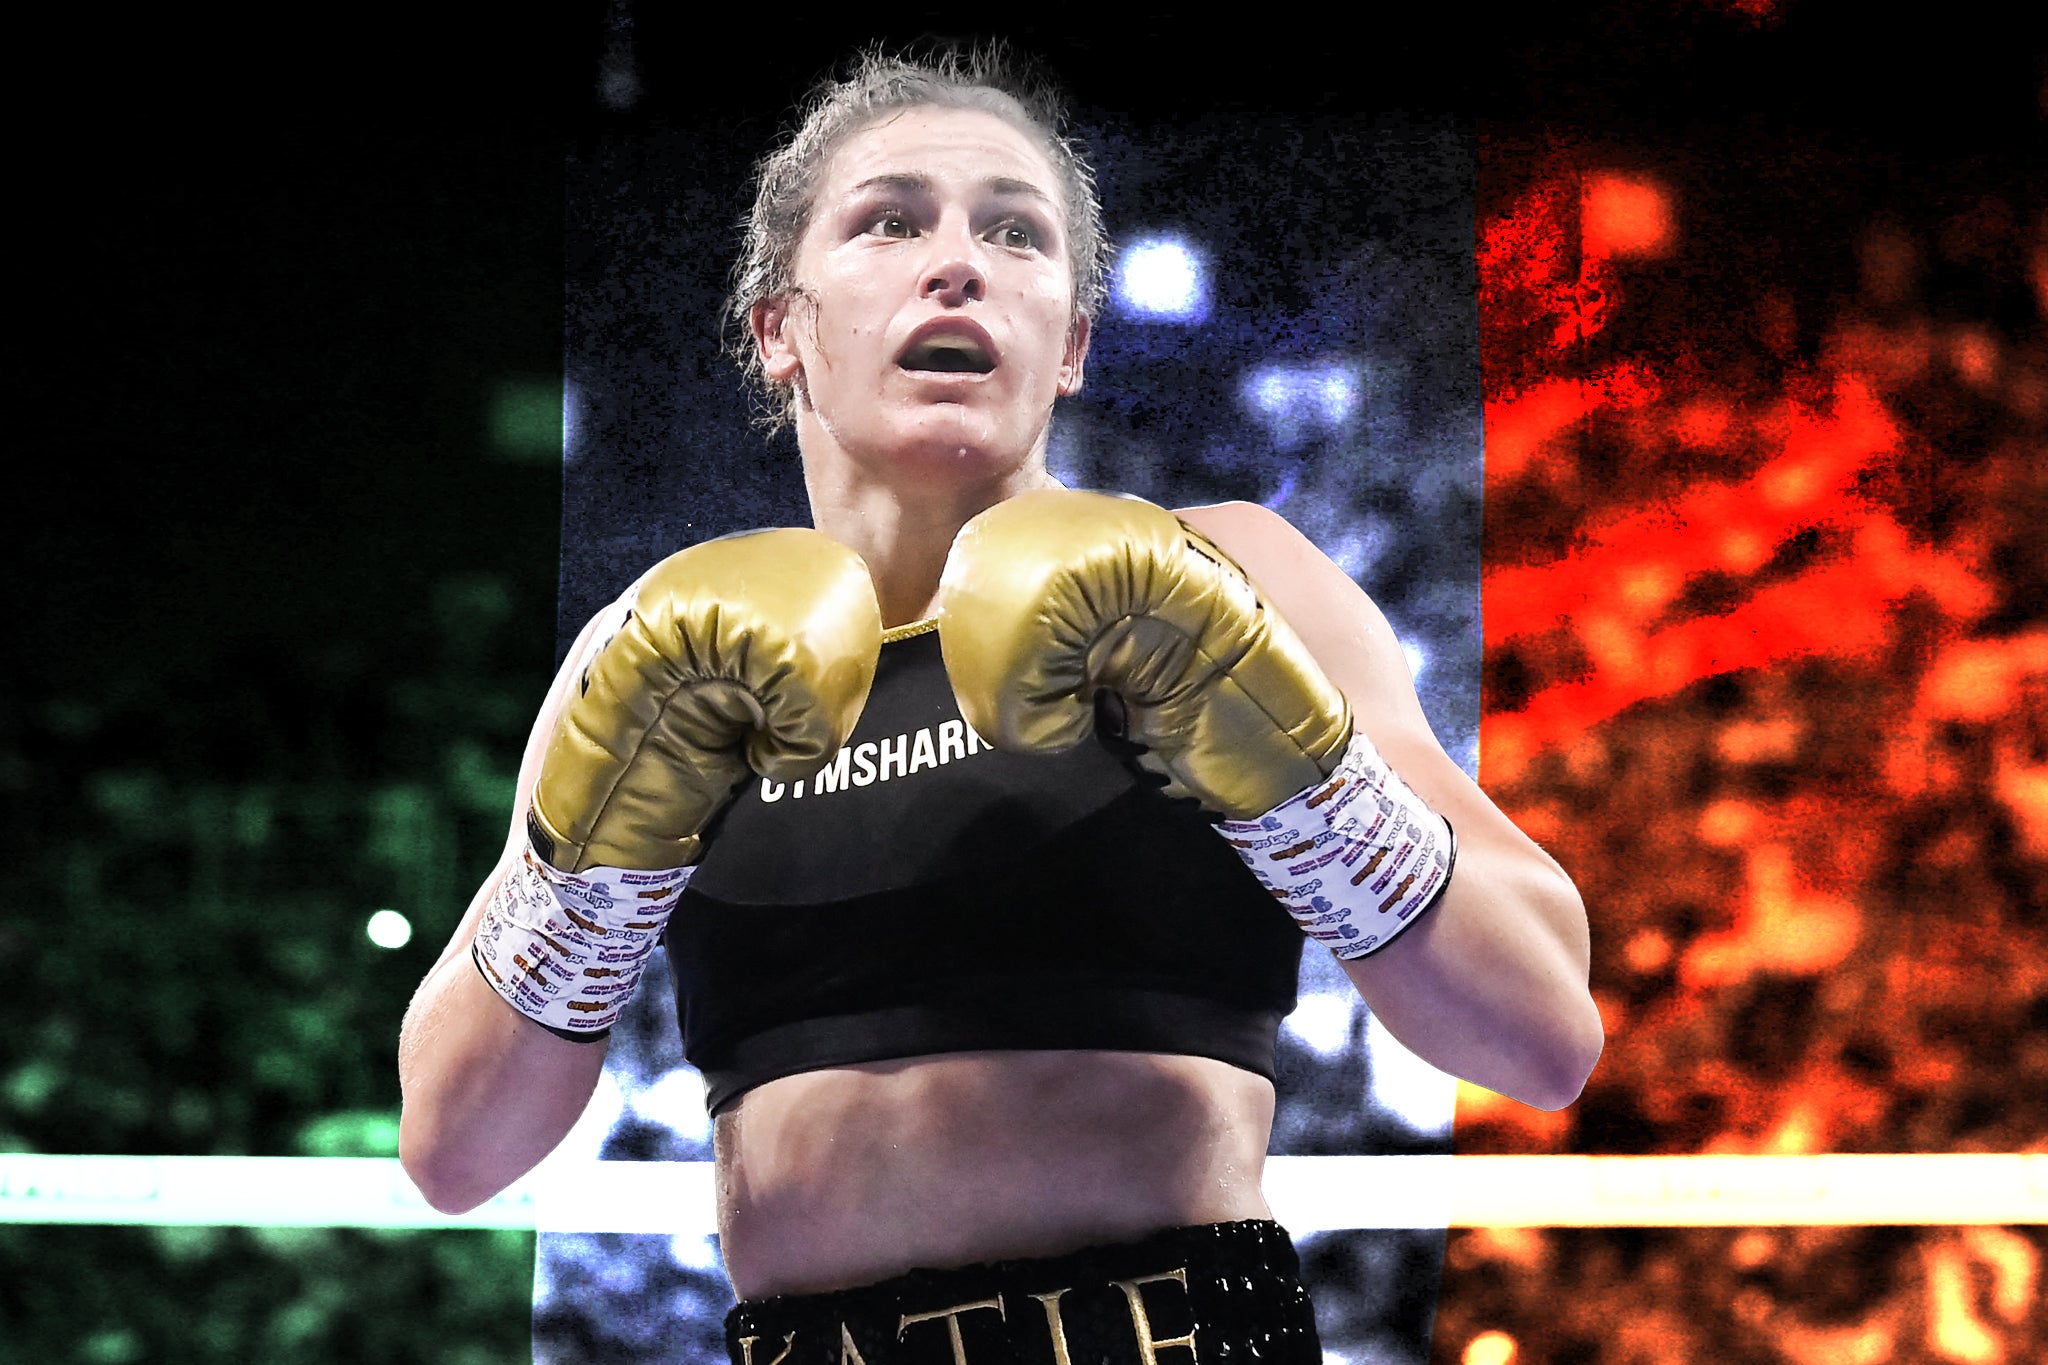 ‘She’s not an athlete, she’s a deity’: Katie Taylor and a nation in awe ...